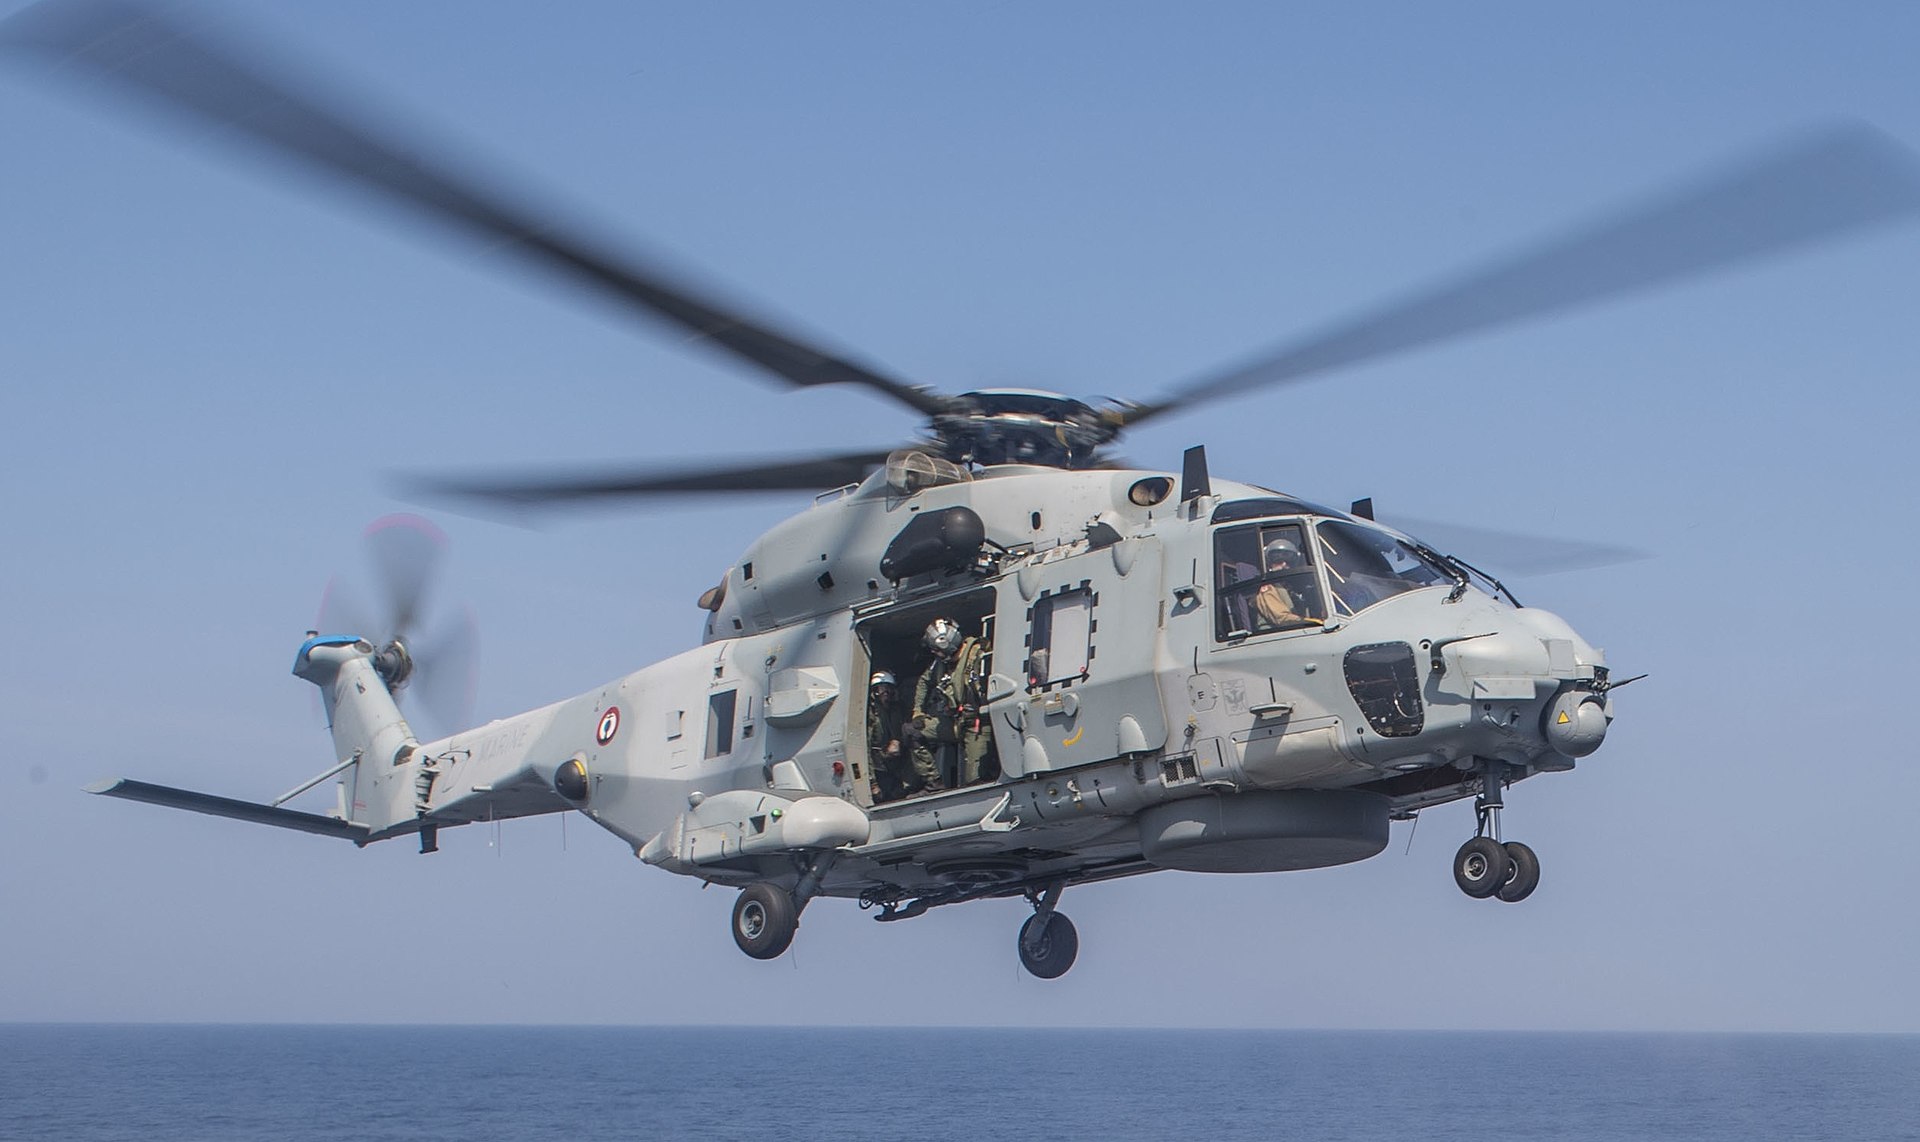 1920px-French_Navy_NH90_lands_on_USS_Antietam_%28CG-54%29_in_the_Bay_of_Bengal_%28cropped%29.jpg